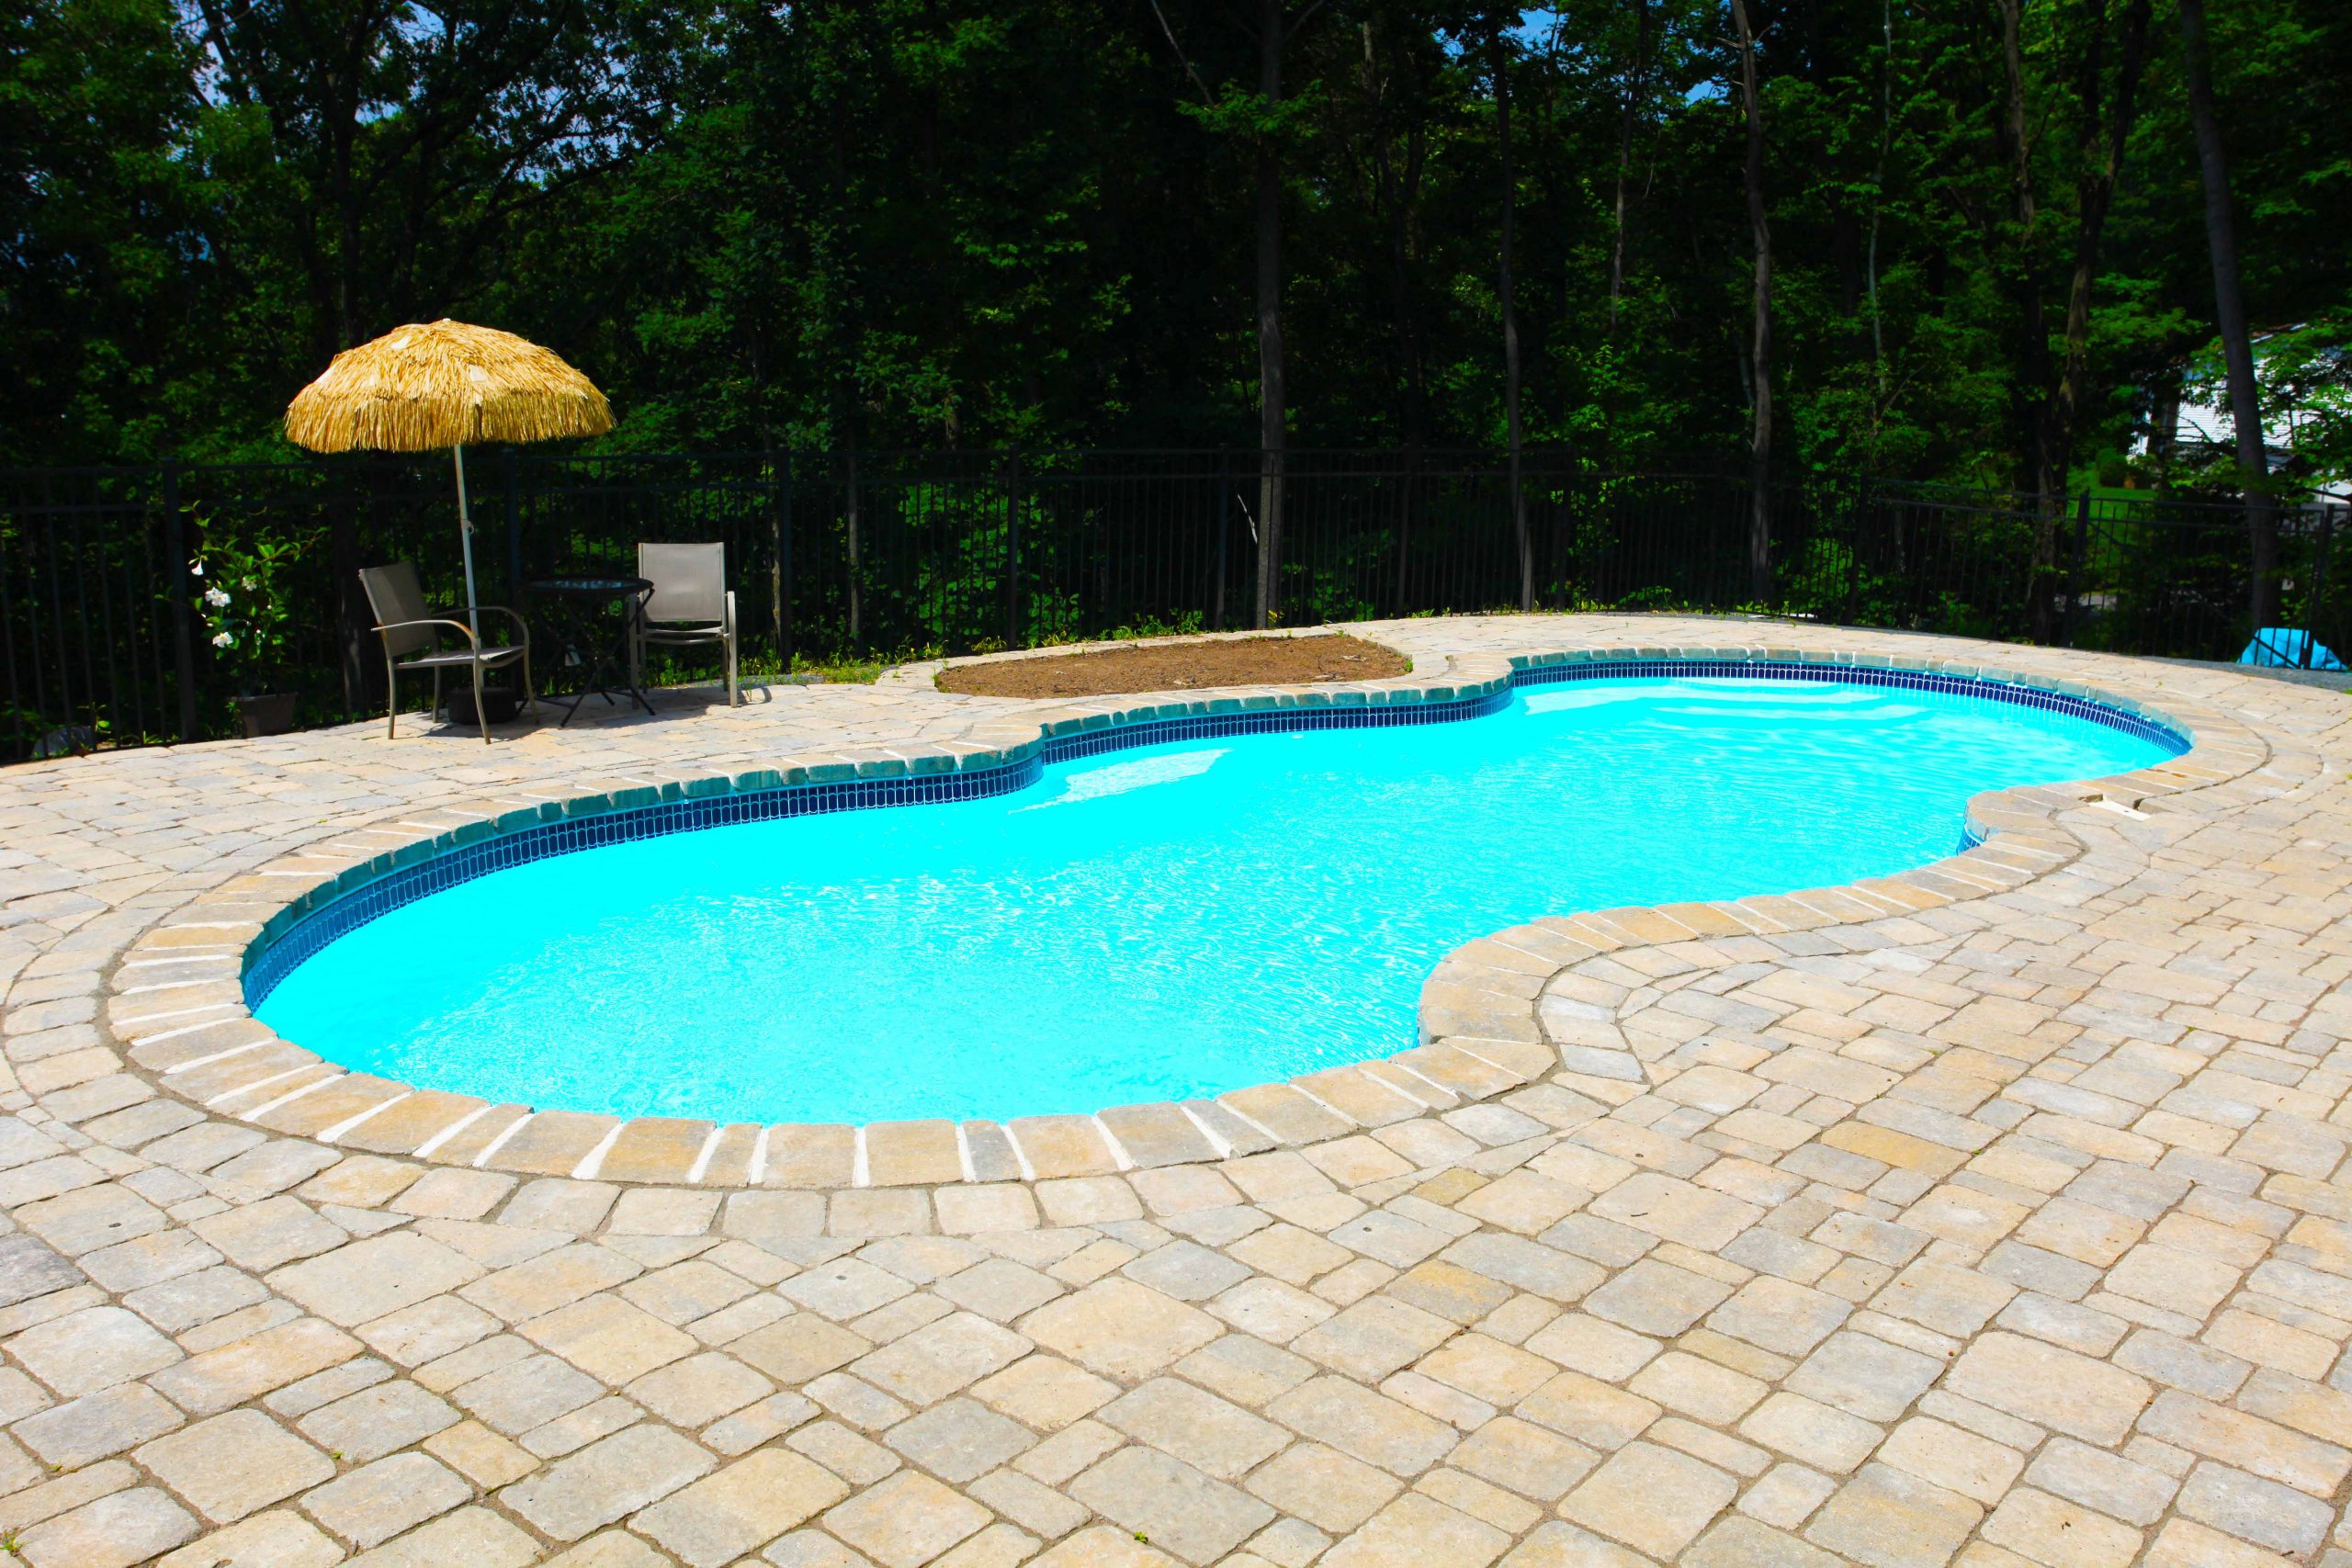 The Mirage is a fully functional fiberglass pool design that enhances your backyard living experience!